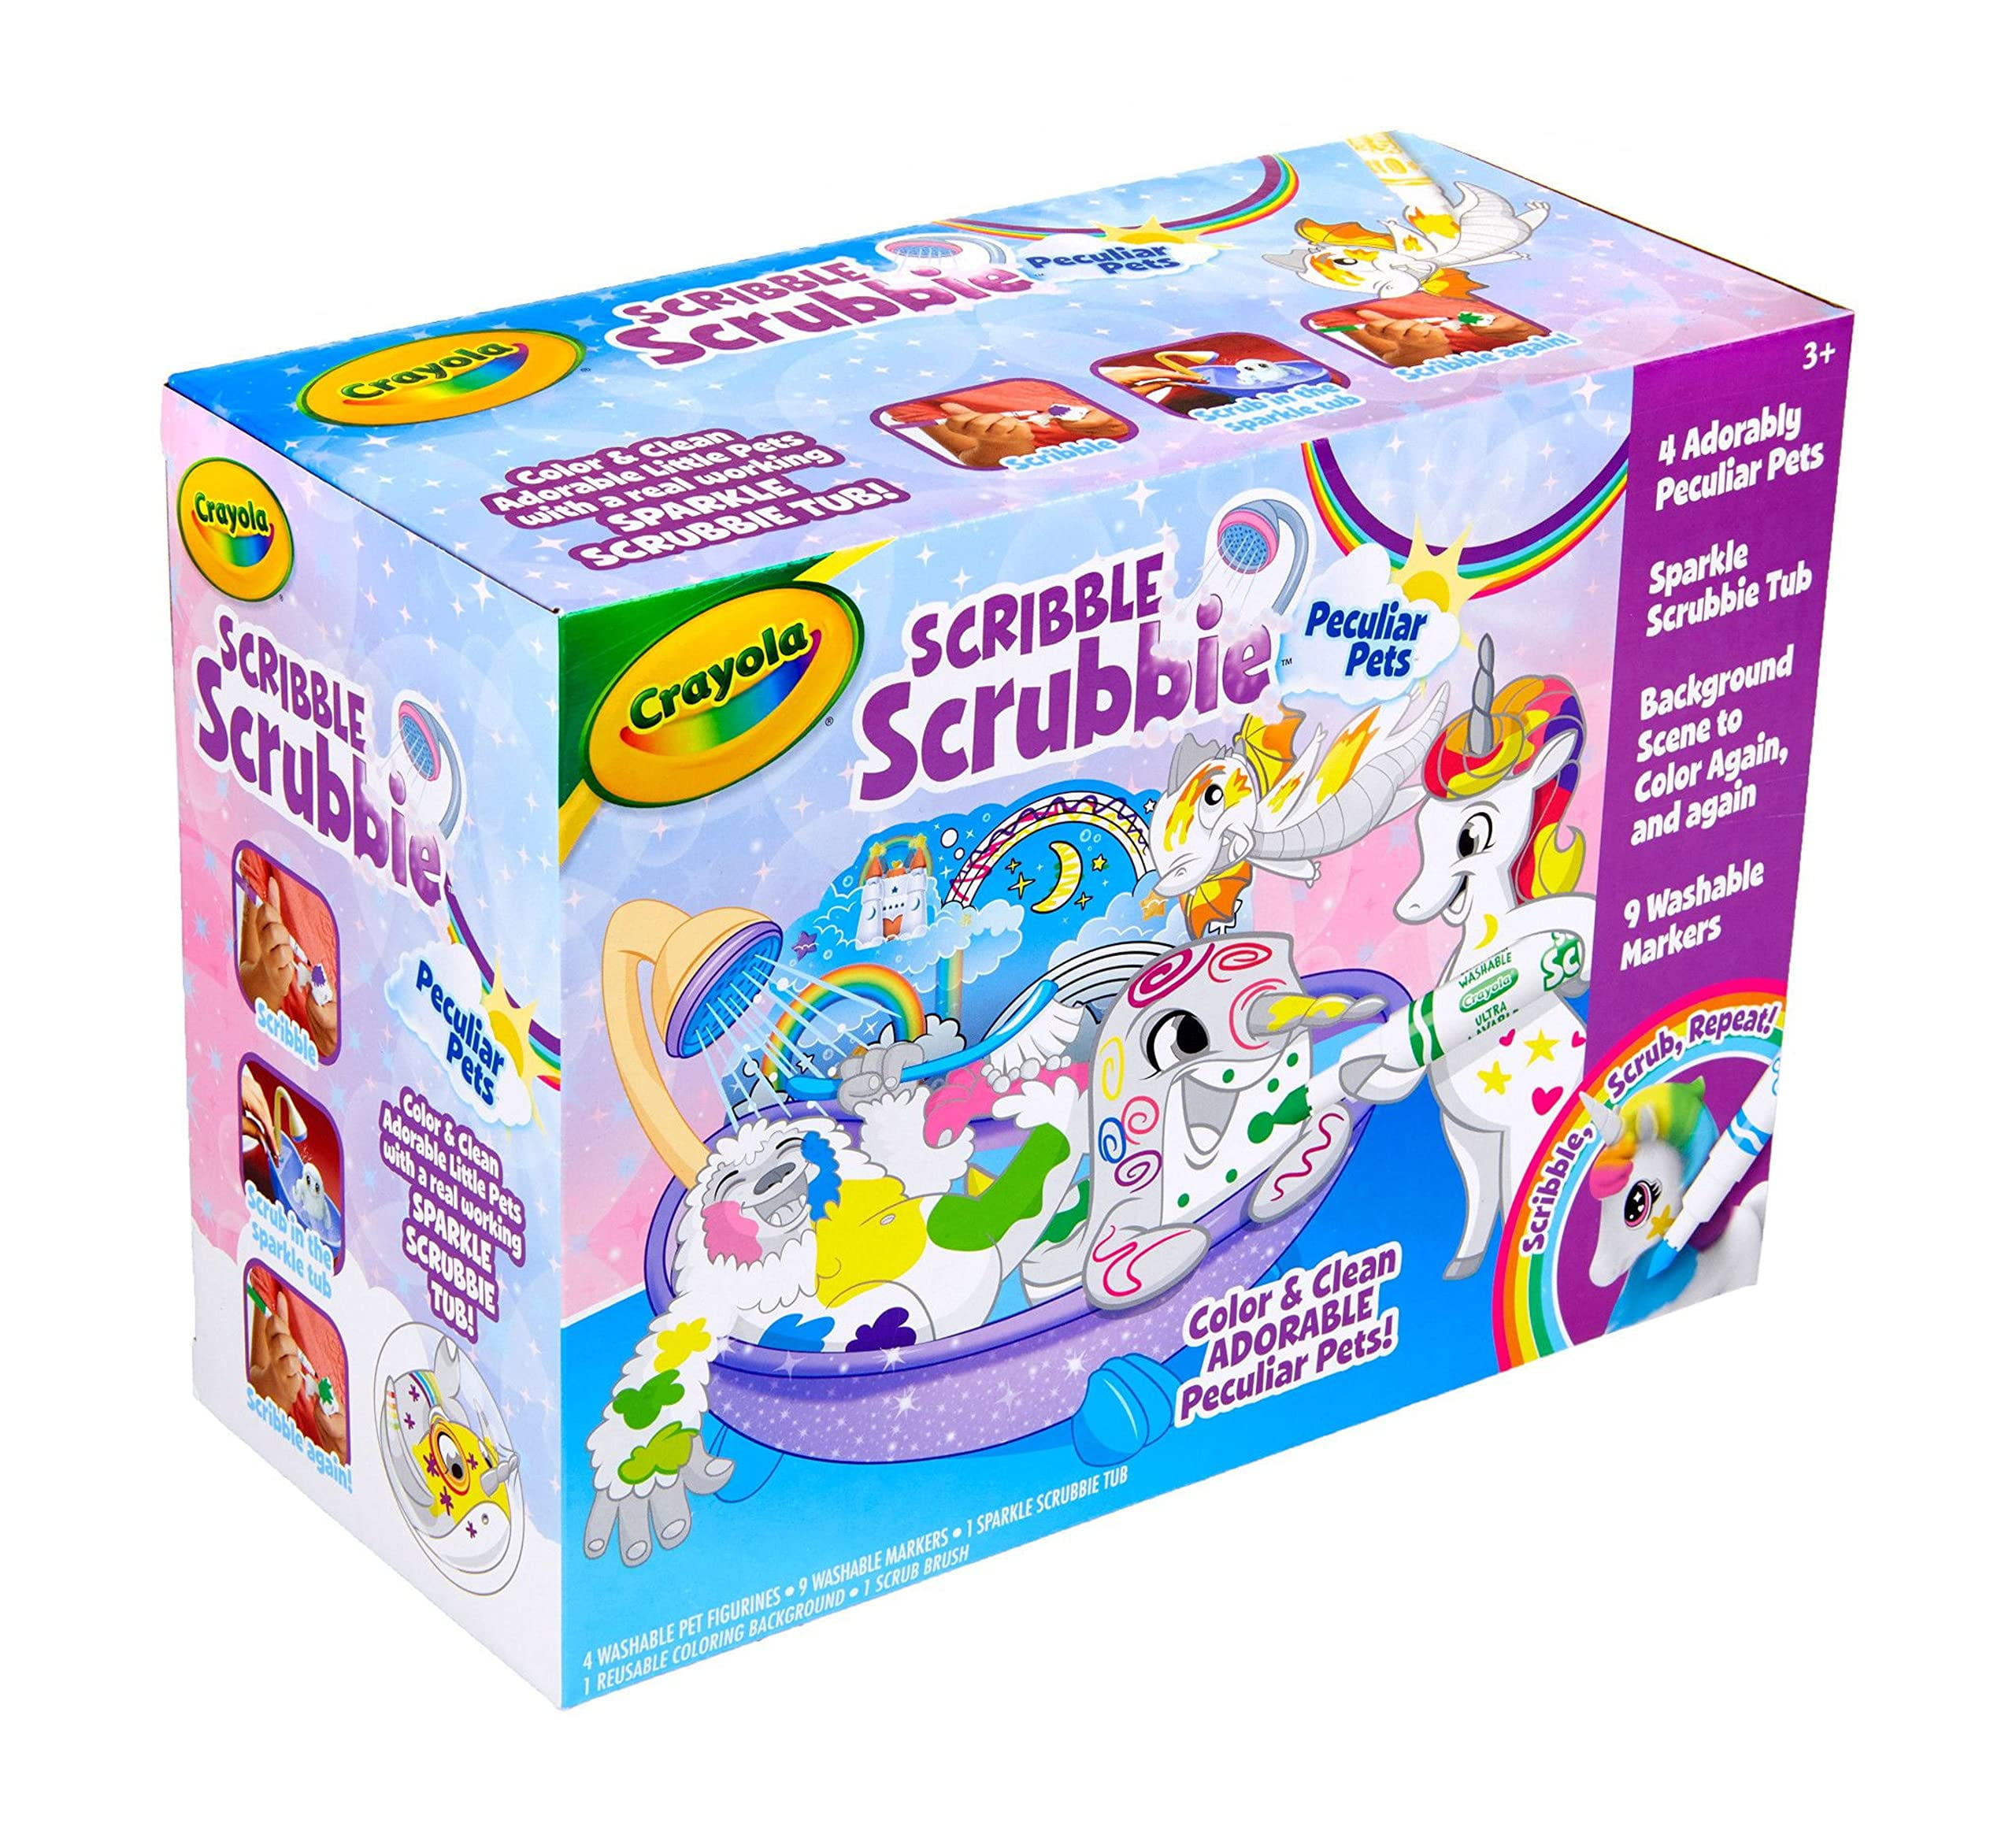 Crayola Scribble Scrubbie Makeover: Jiji and Lily – Curi-Oh!